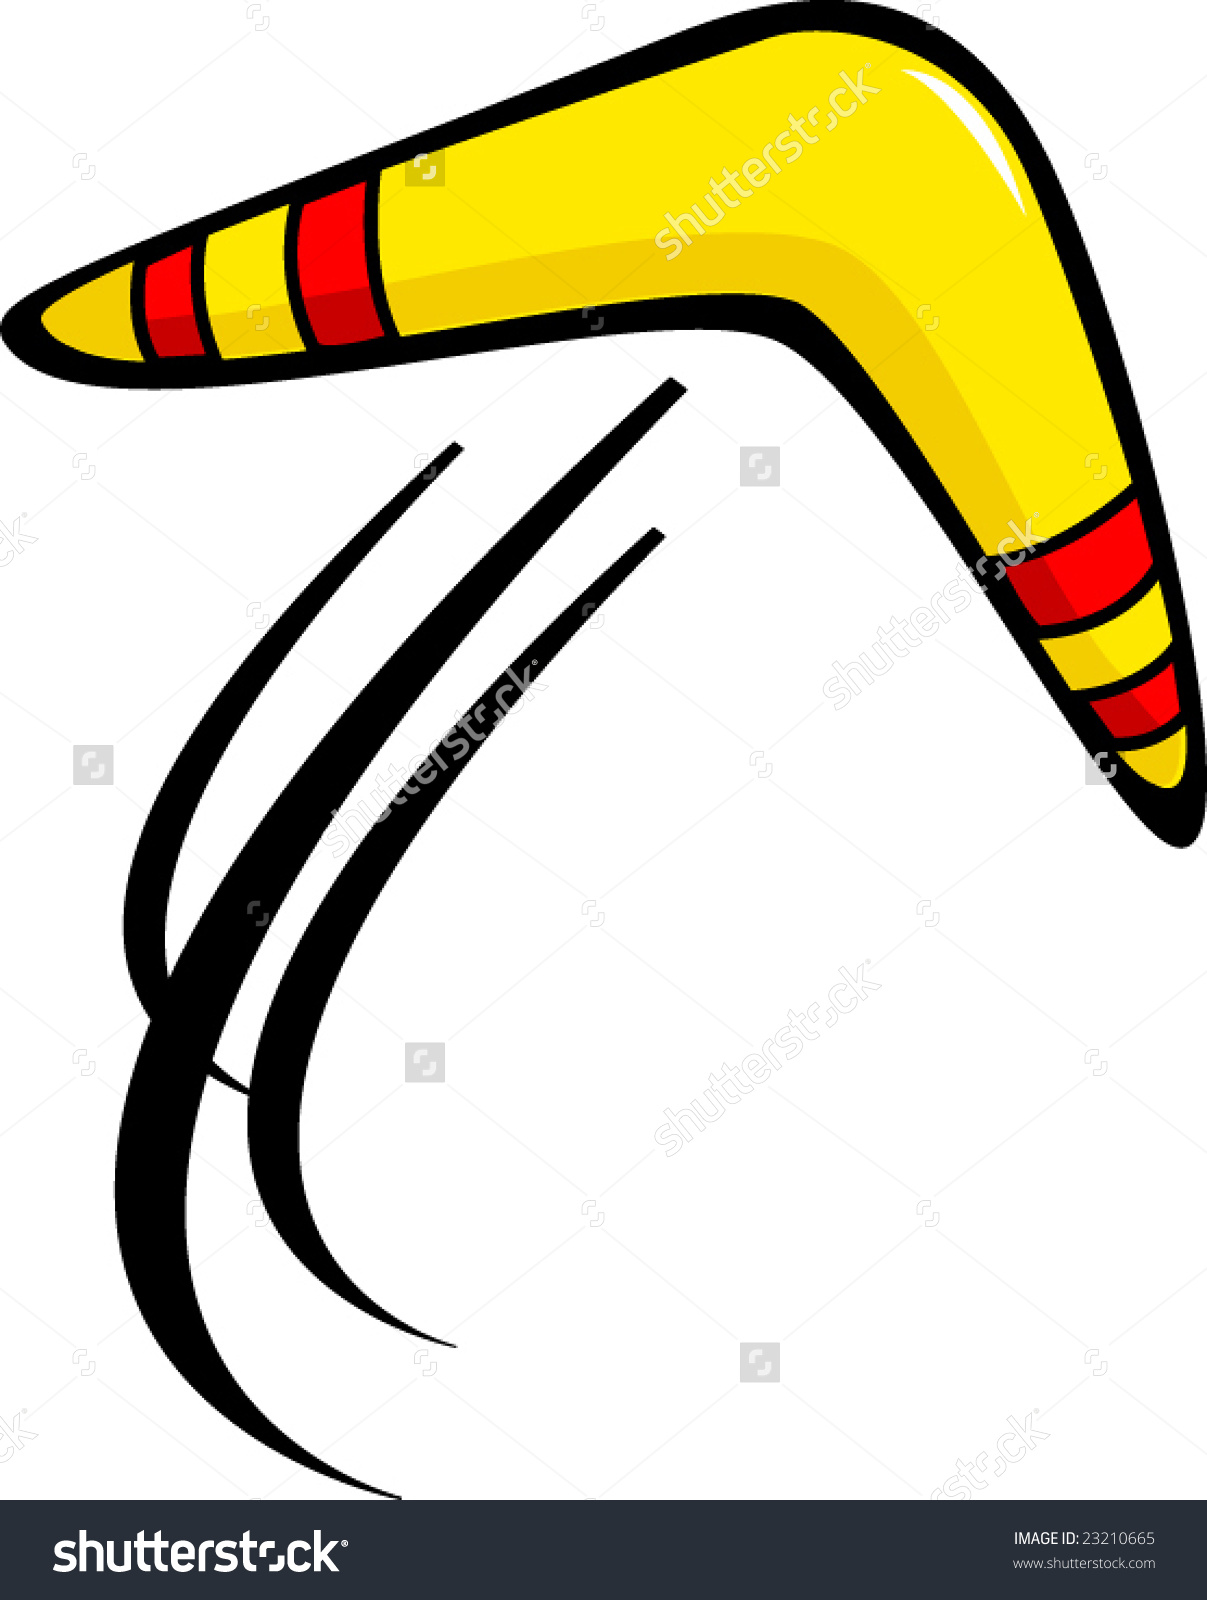 Boomerang clipart 20 free Cliparts | Download images on ...